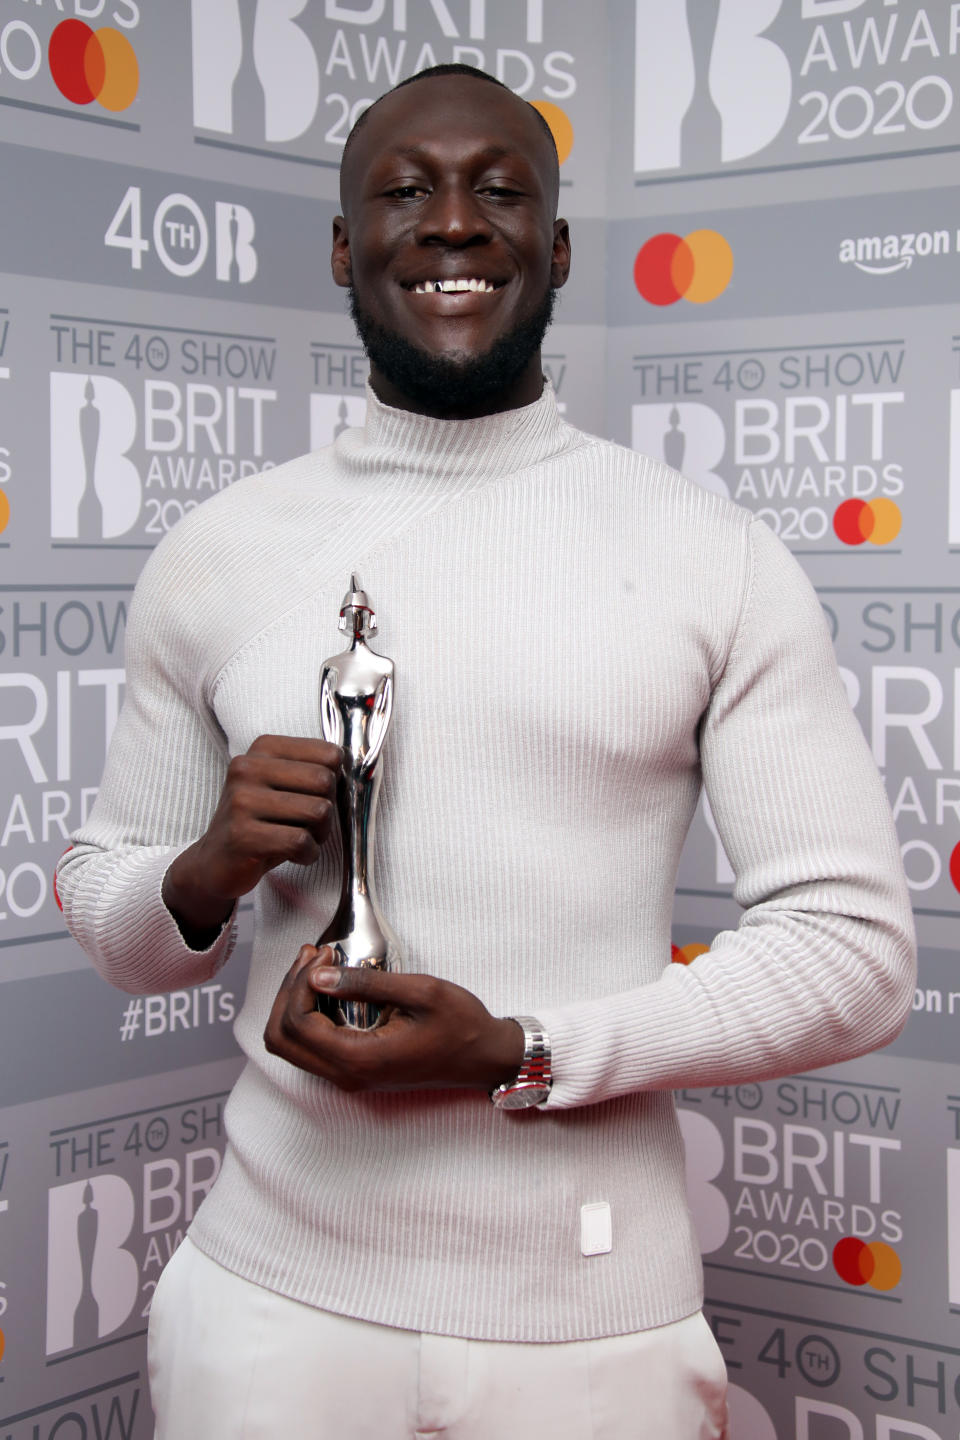 LONDON, ENGLAND - FEBRUARY 18: (EDITORIAL USE ONLY) Stormzy, winner of Male Solo Artist poses in the winners rooms at The BRIT Awards 2020 at The O2 Arena on February 18, 2020 in London, England. (Photo by Mike Marsland/WireImage)